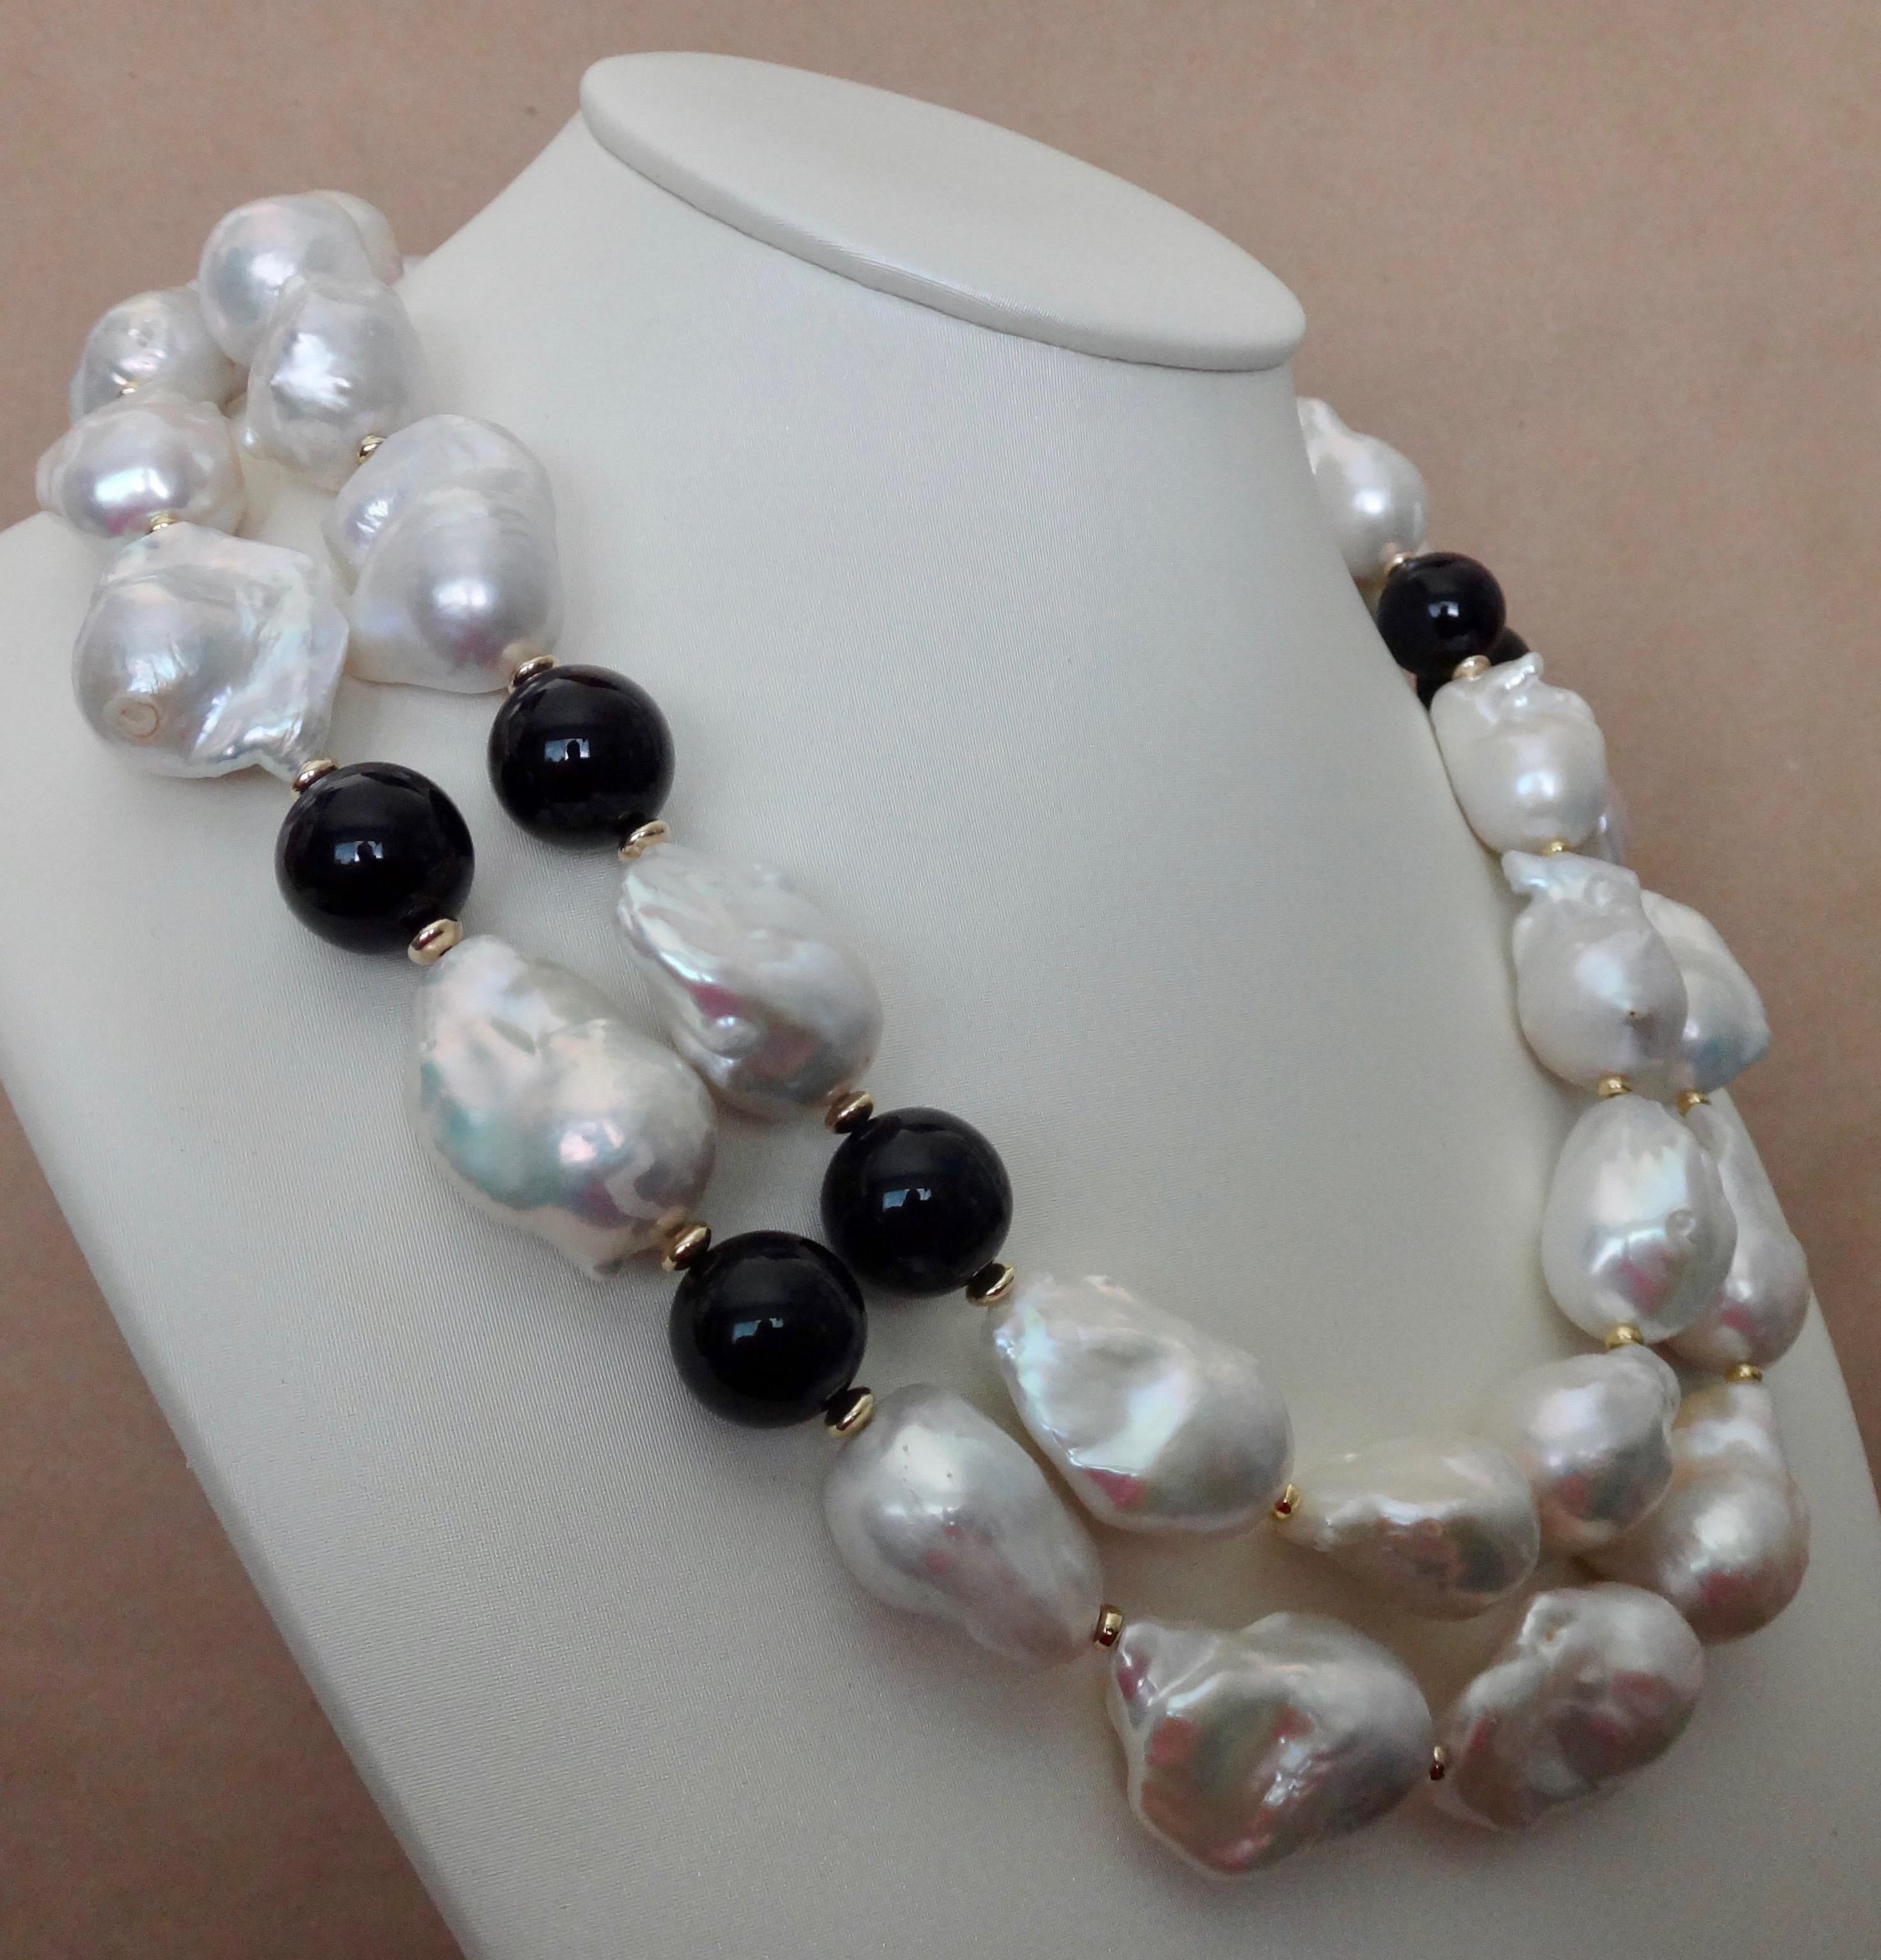 Two strands of enormous baroque Chinese freshwater pearls and black onyx beads comprise this dramatic necklace.  The pearls are graduated in size.  The largest measures 32mm.  Baroque pearls are so casual and easy to dress up or down.  The design